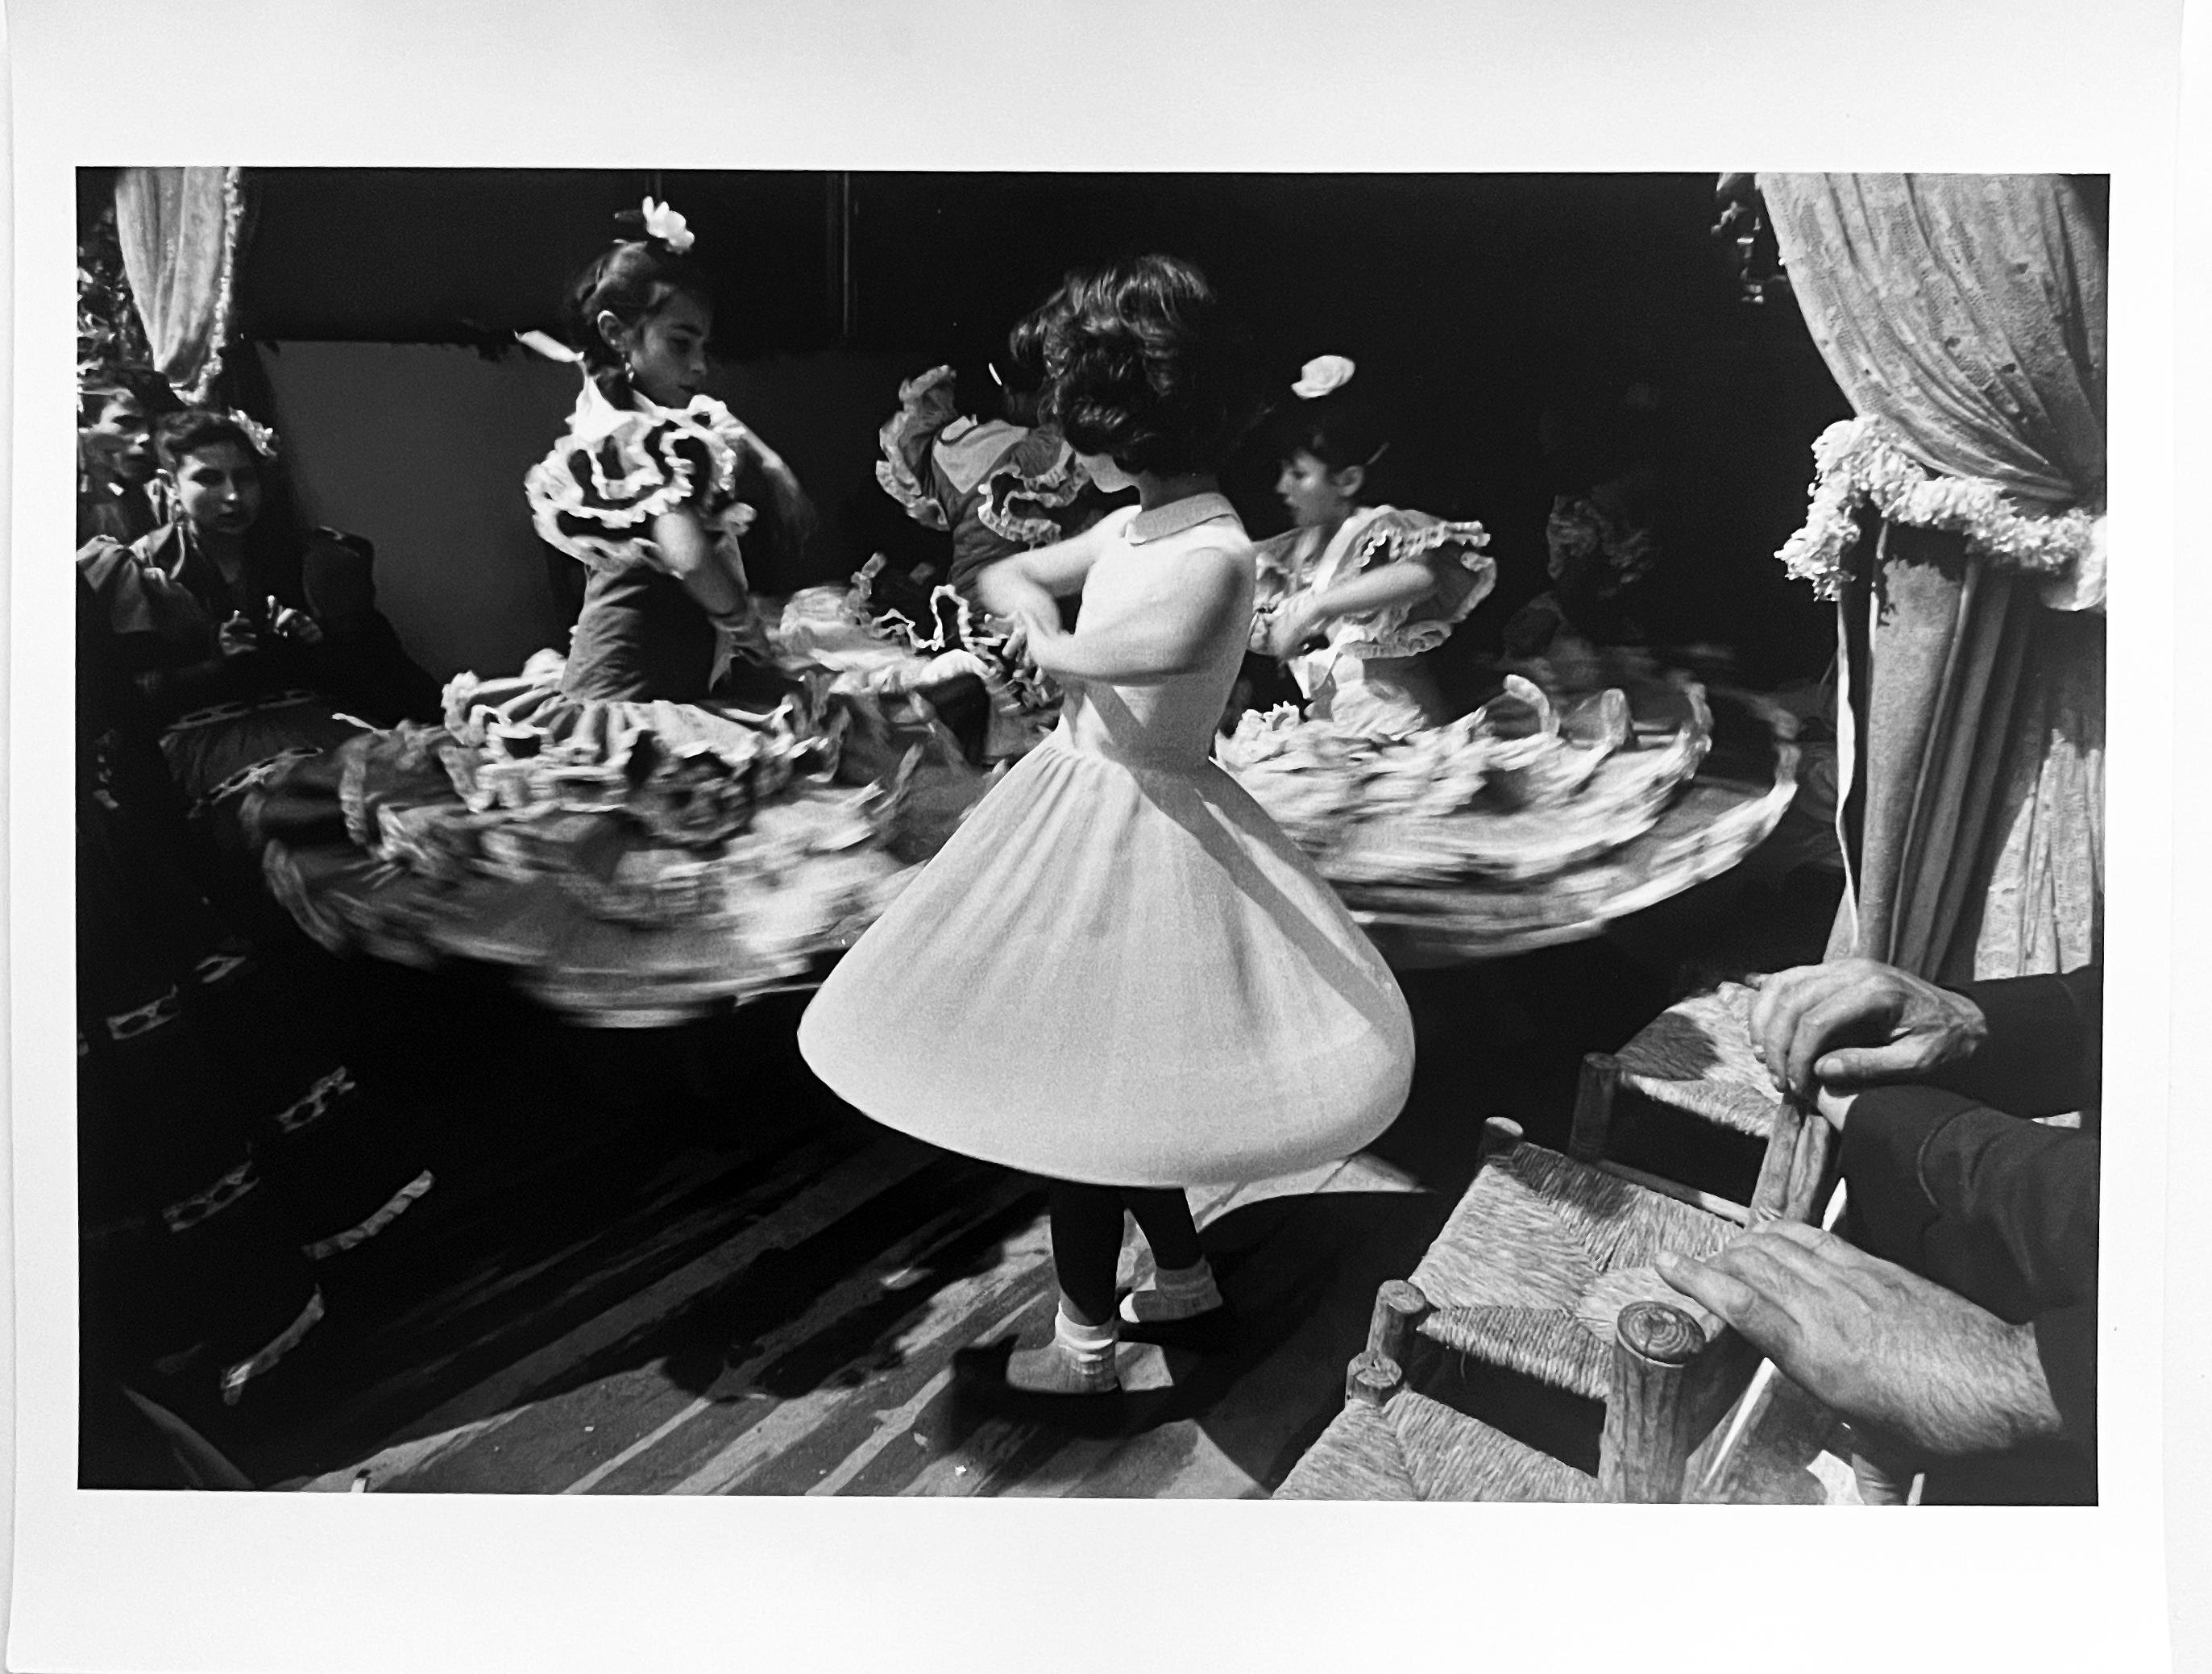 Ernst Haas Black and White Photograph - Dancing Girls, Black and White Portrait Photograph of Children in Sevilla, Spain